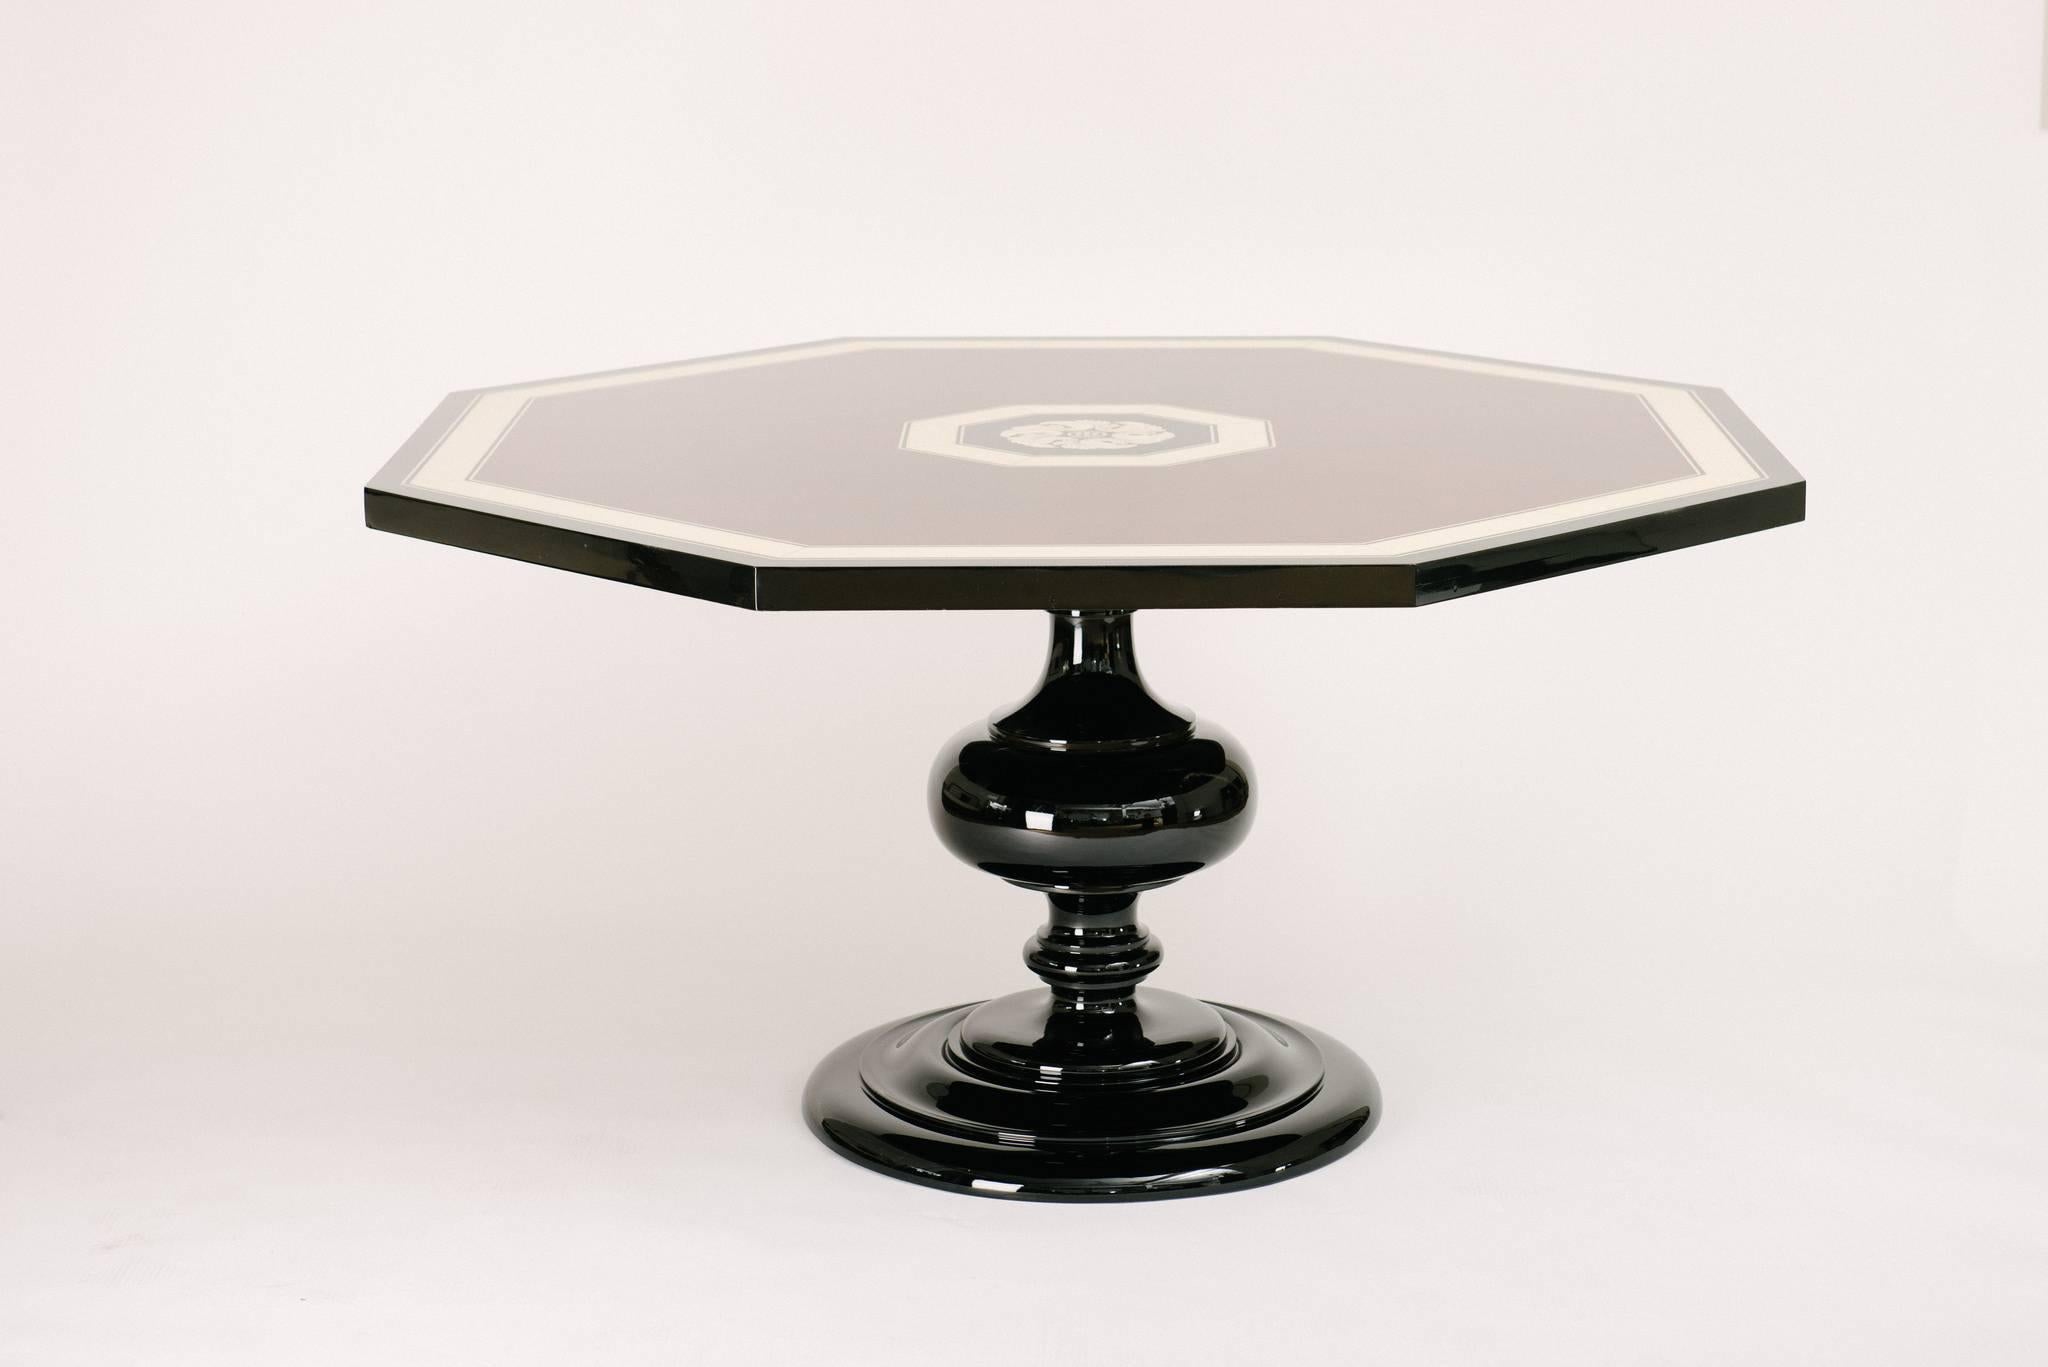 Black lacquer 1940s custom dining or center table with beautiful inlays attributed to ivory and tortoise and a stylized turned pedestal base.

Slight fractures in the lacquer come from the underside due to the shrinkage of the old wood. These